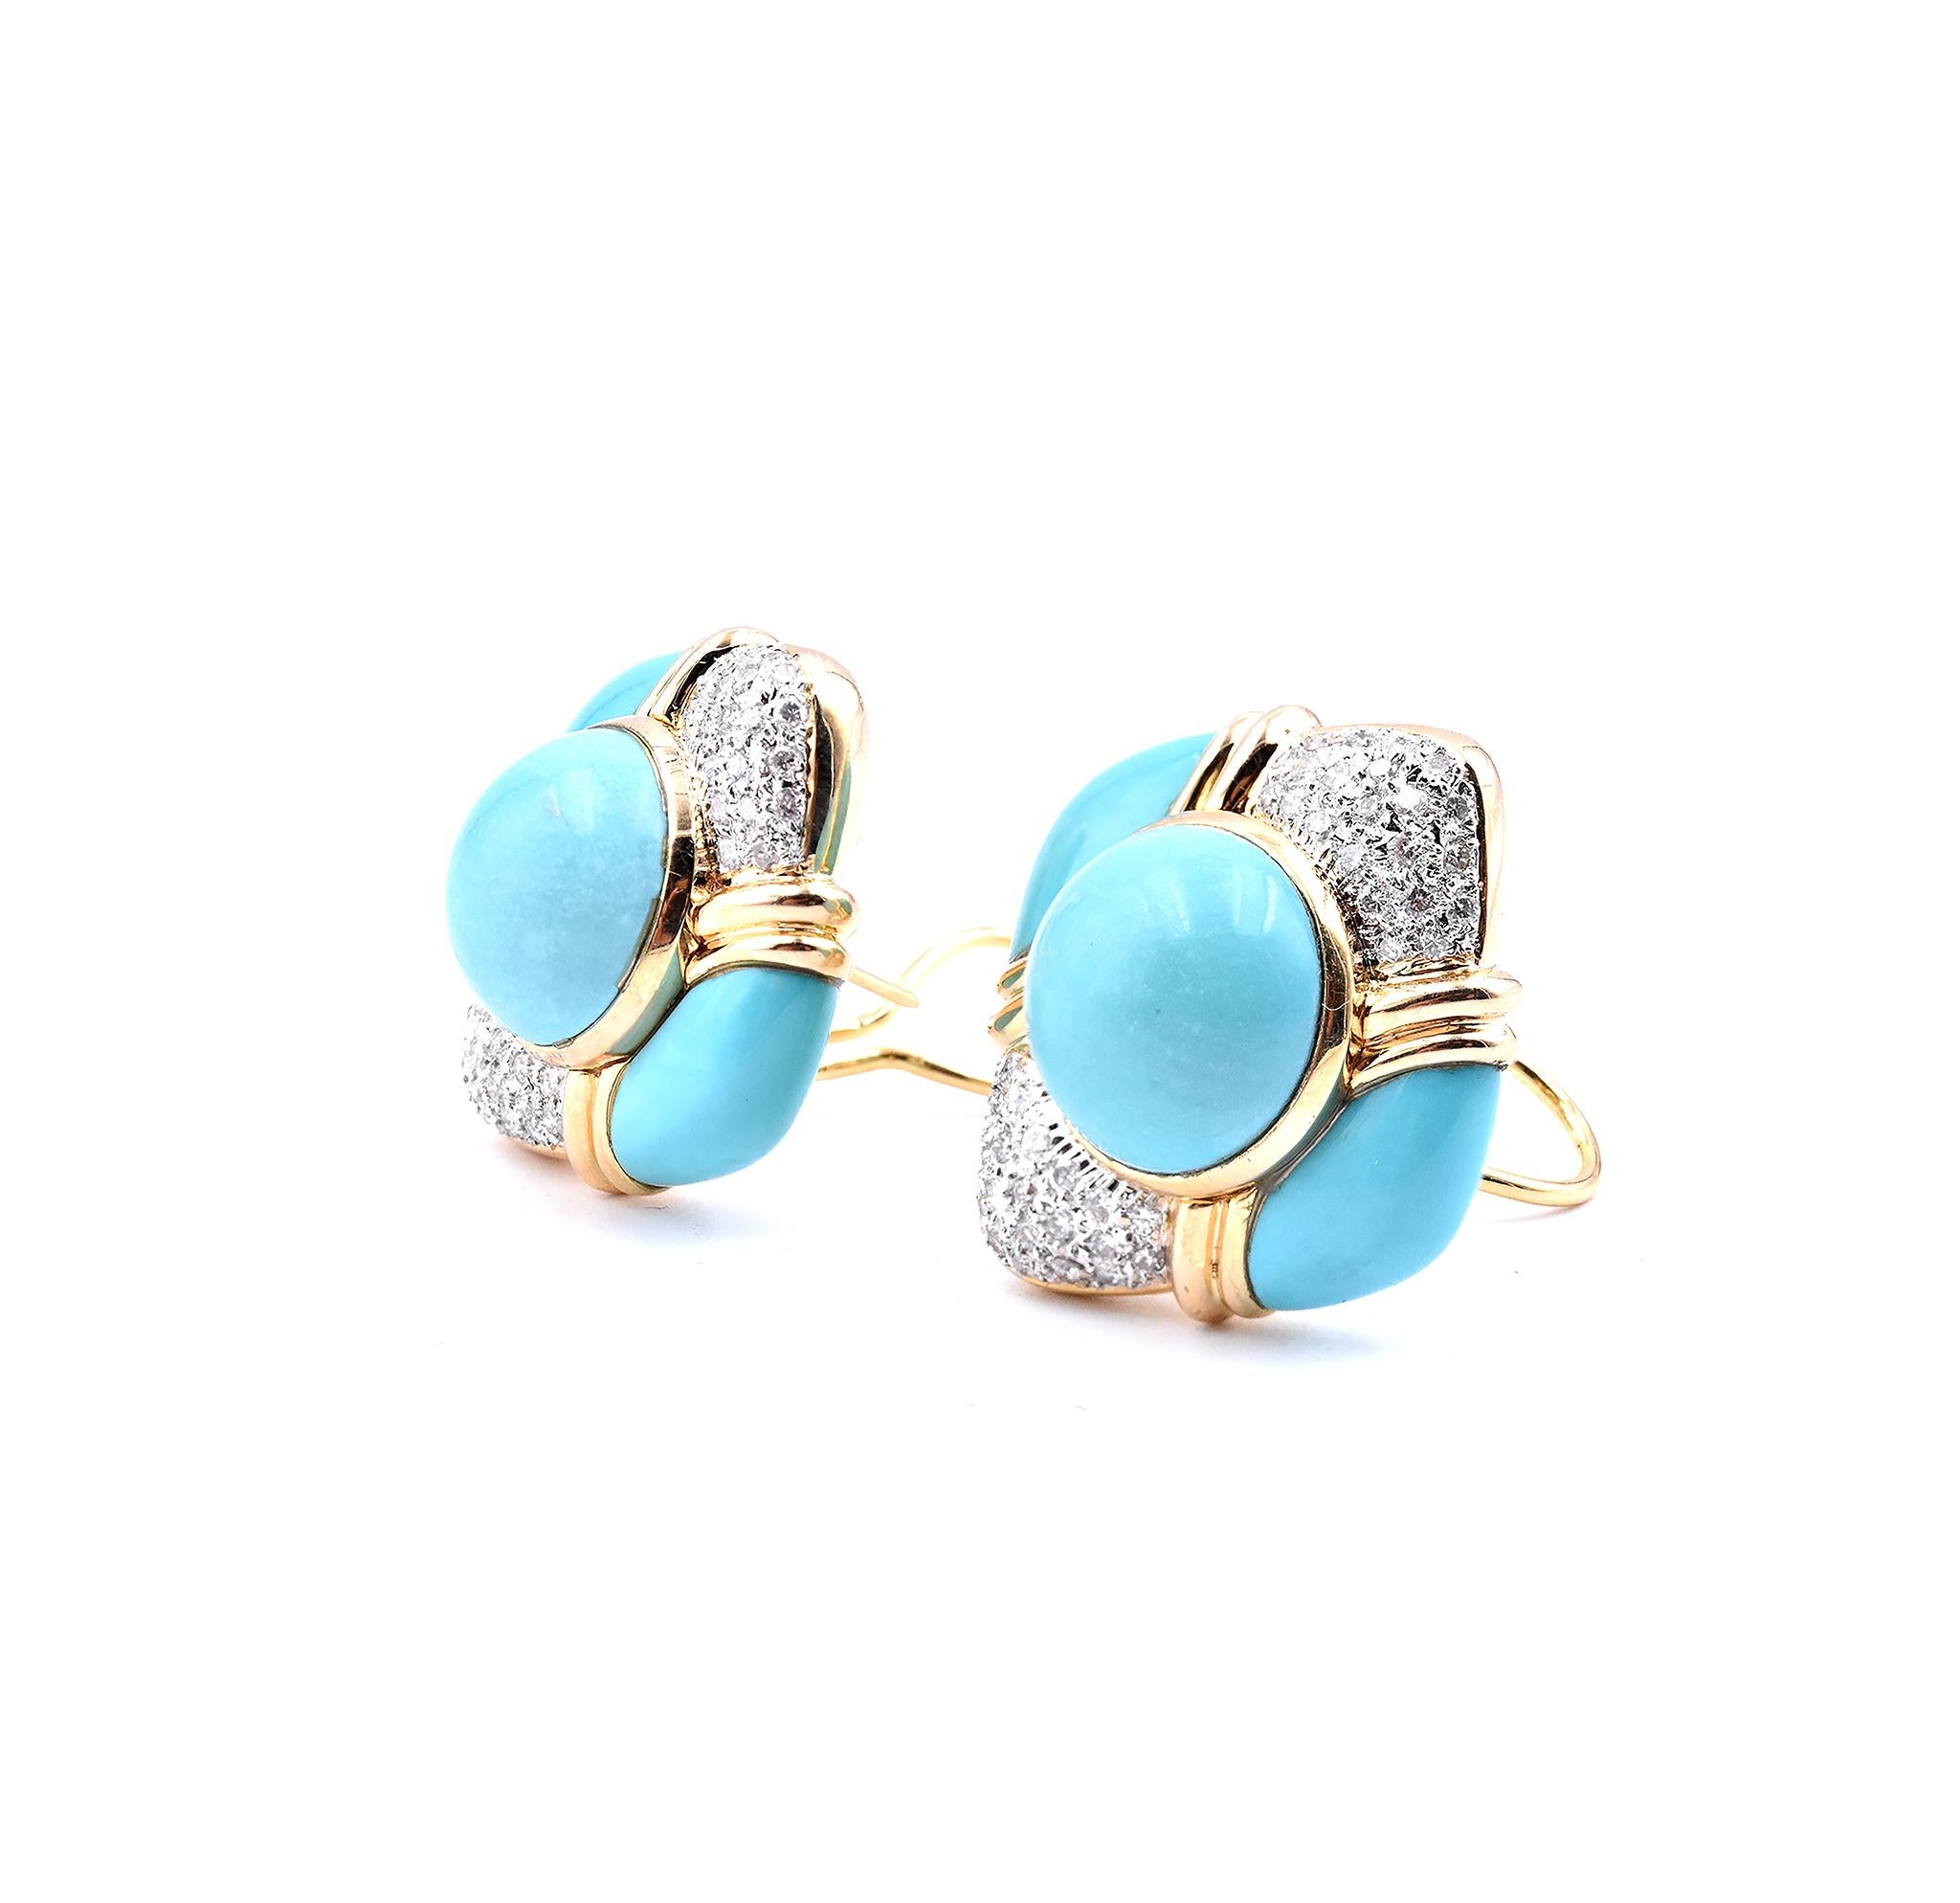 Round Cut 18 Karat Yellow Gold Persian Turquoise and Diamond Button Earrings